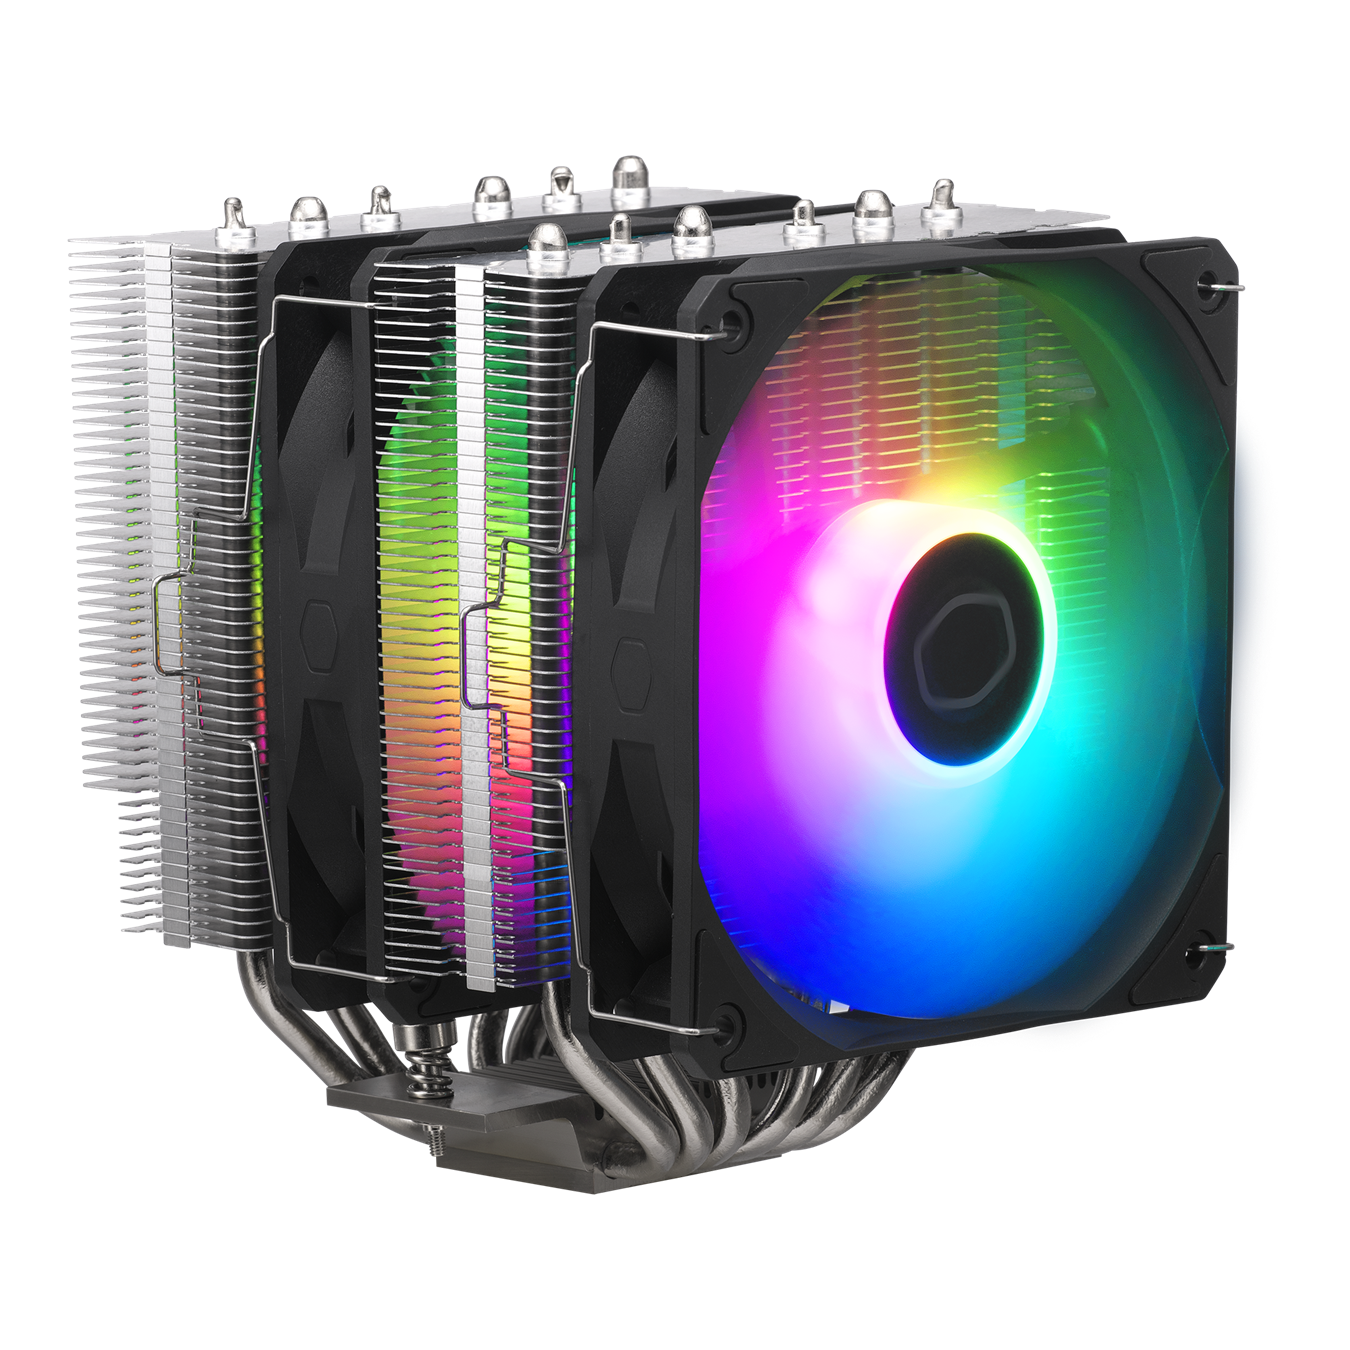 Hyper 620S - Front View at 45 Degree Angle with RGB Lighting